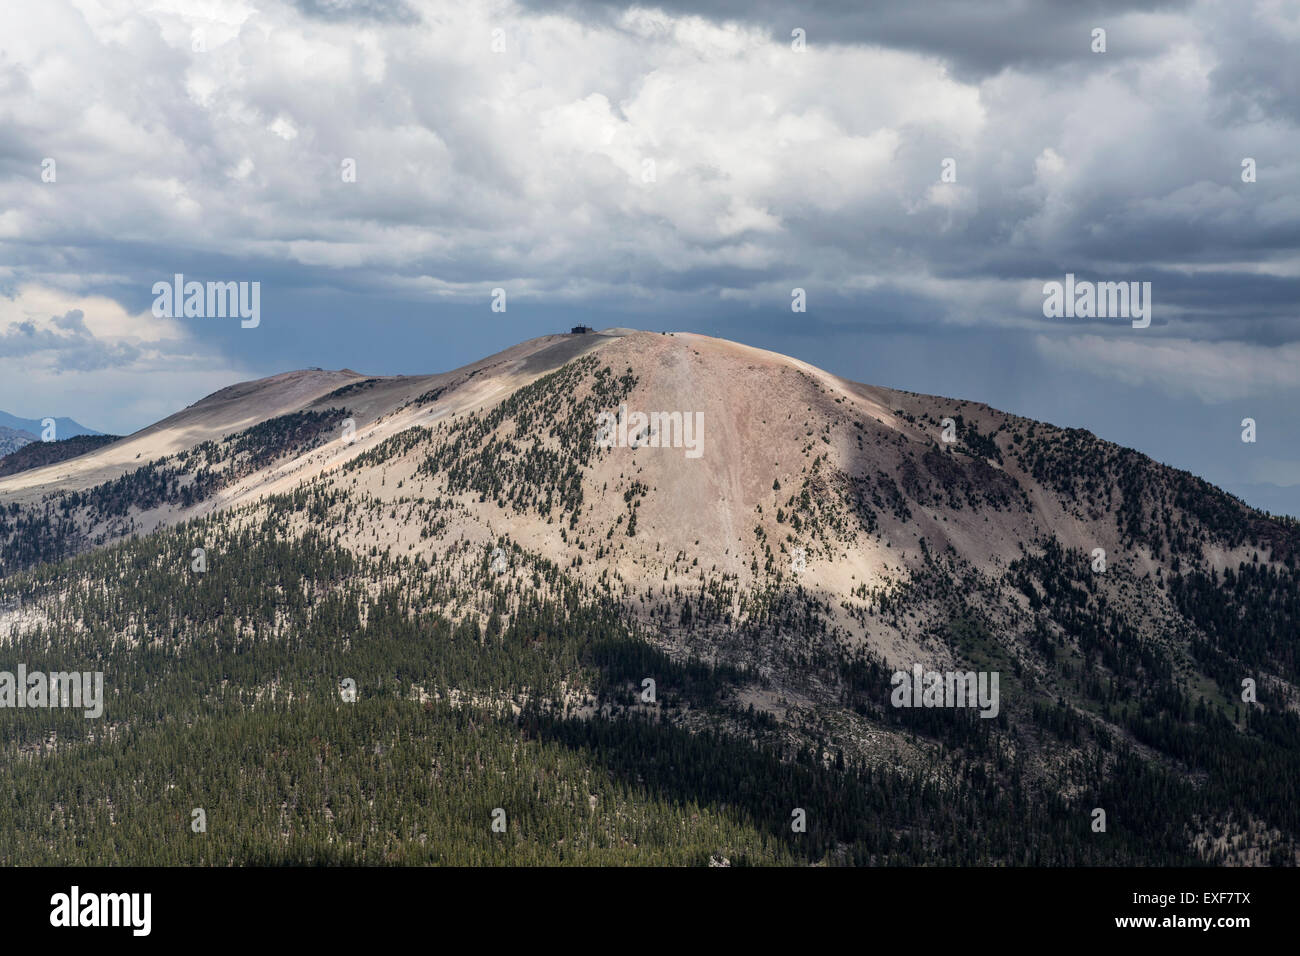 Summer thunderstorms forming over Mammoth Mountain in California's Sierra Nevada. Stock Photo